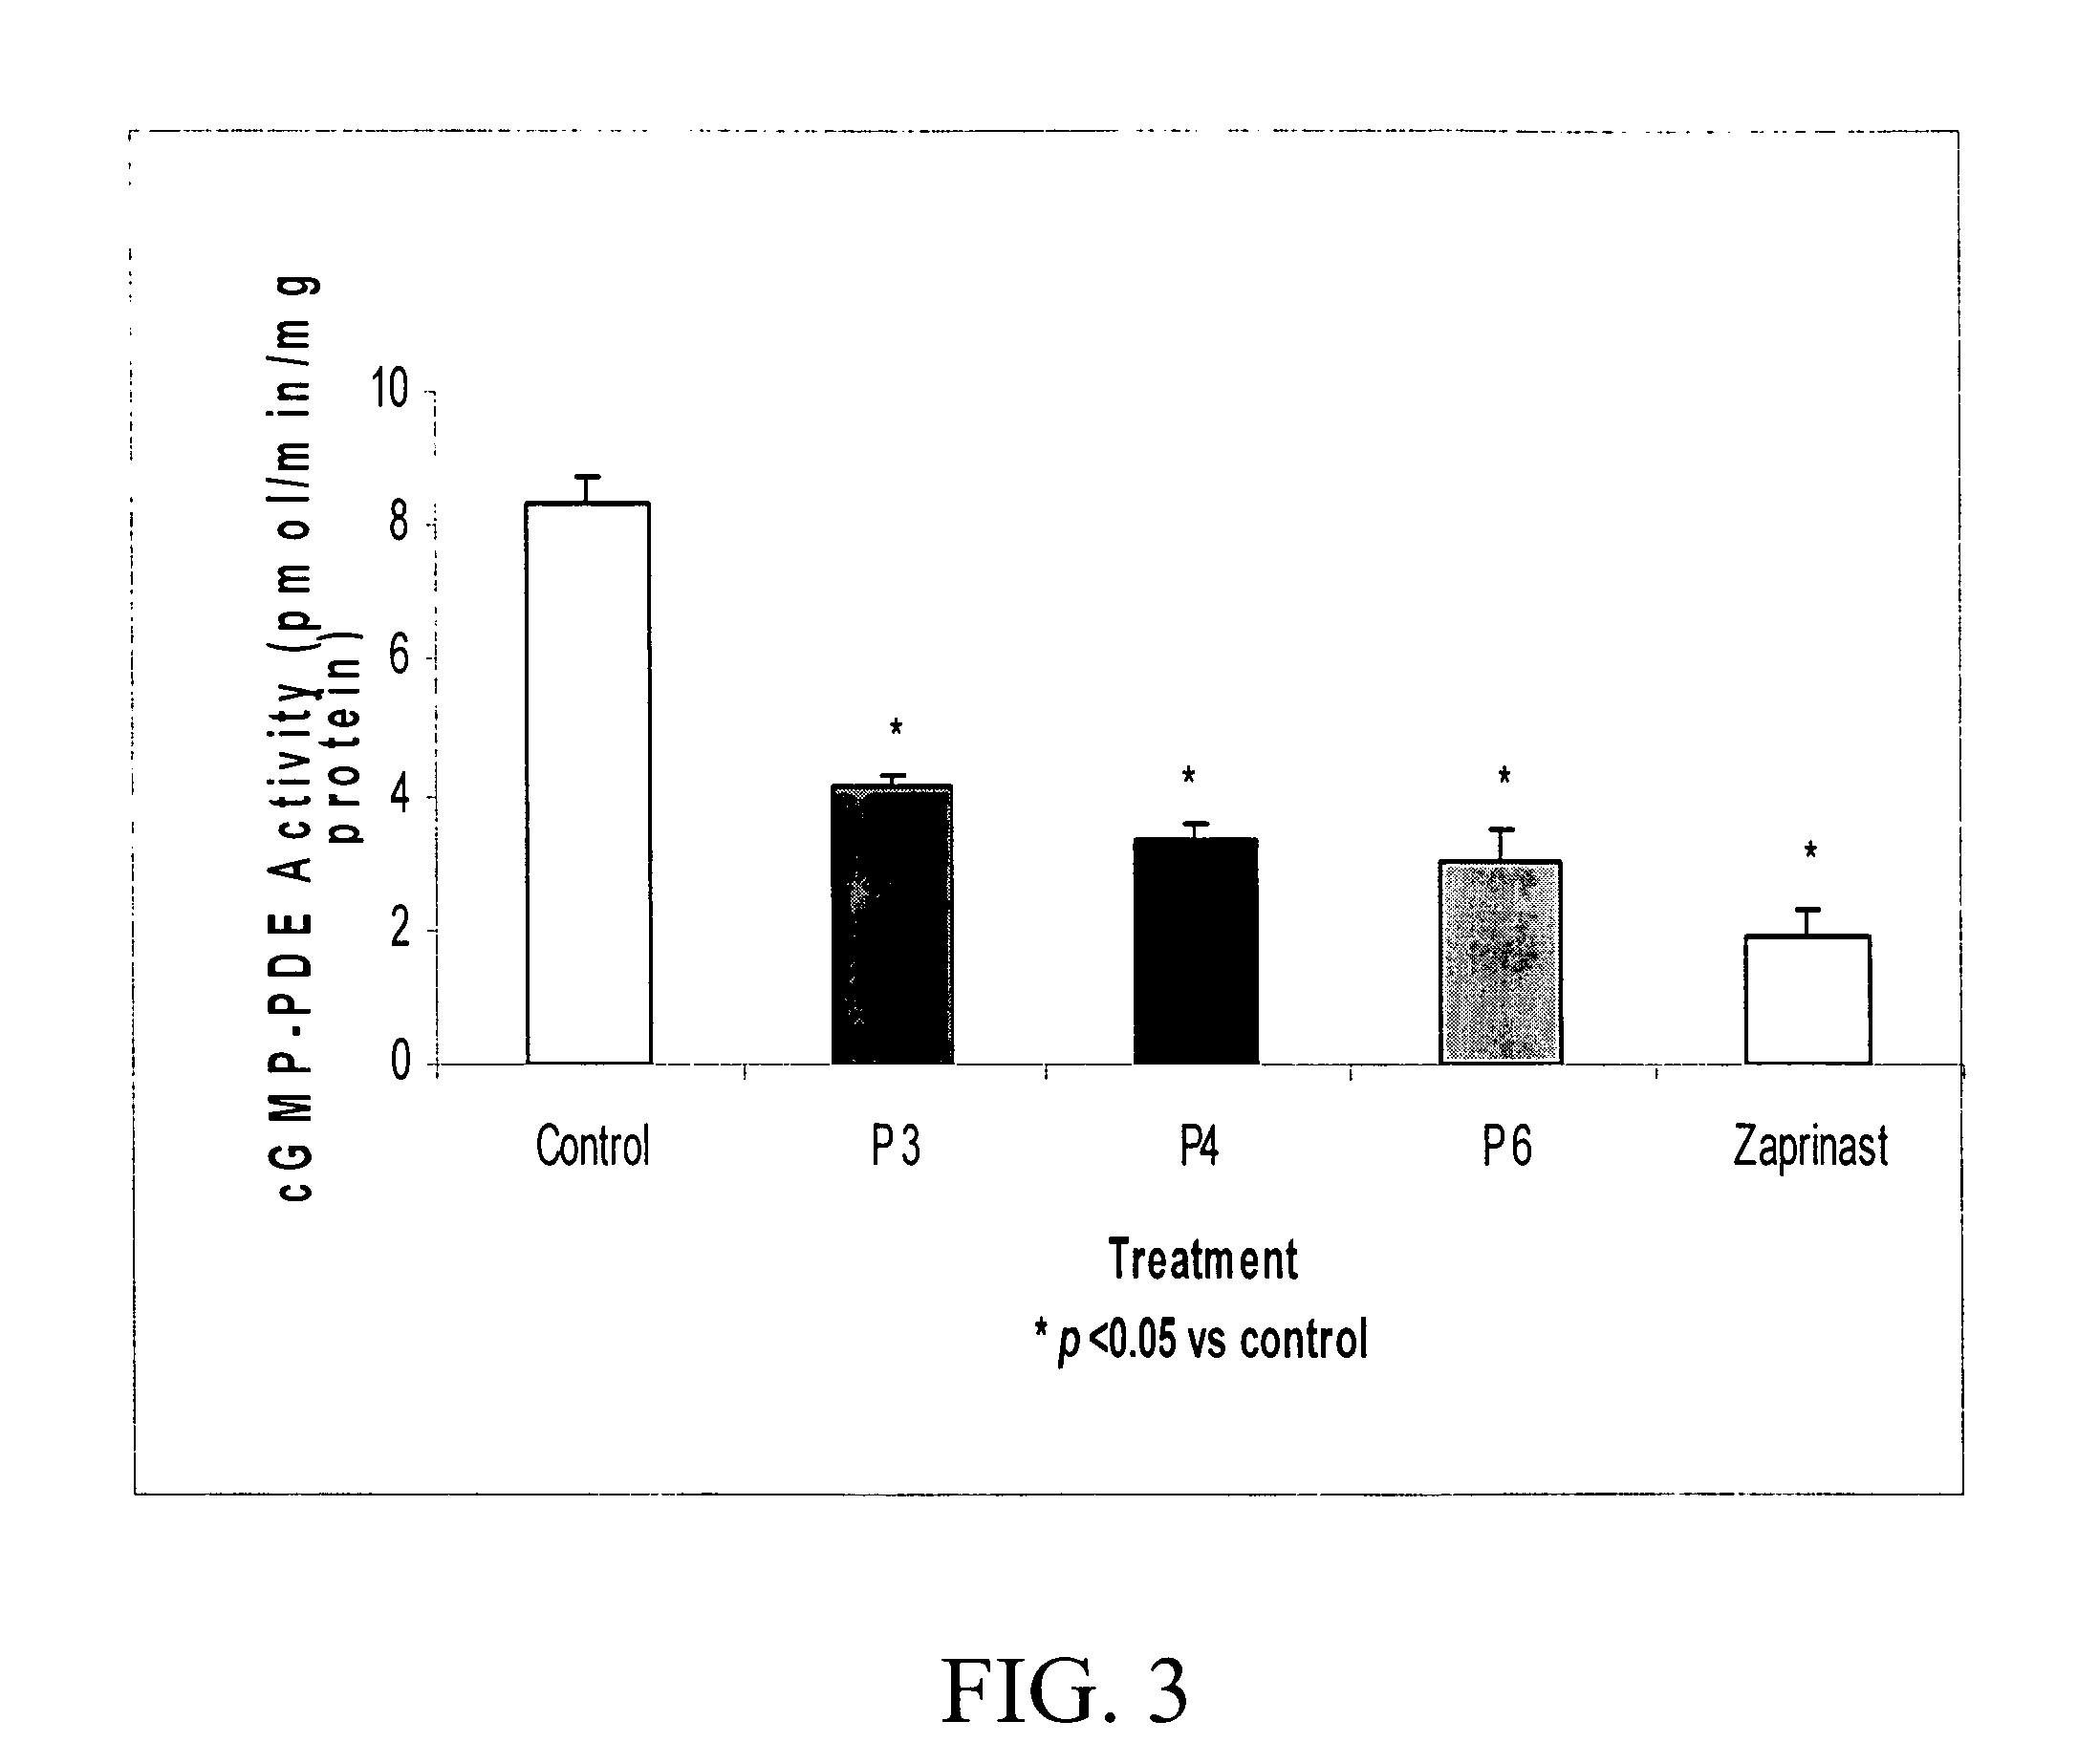 Materials and methods for regulating blood flow